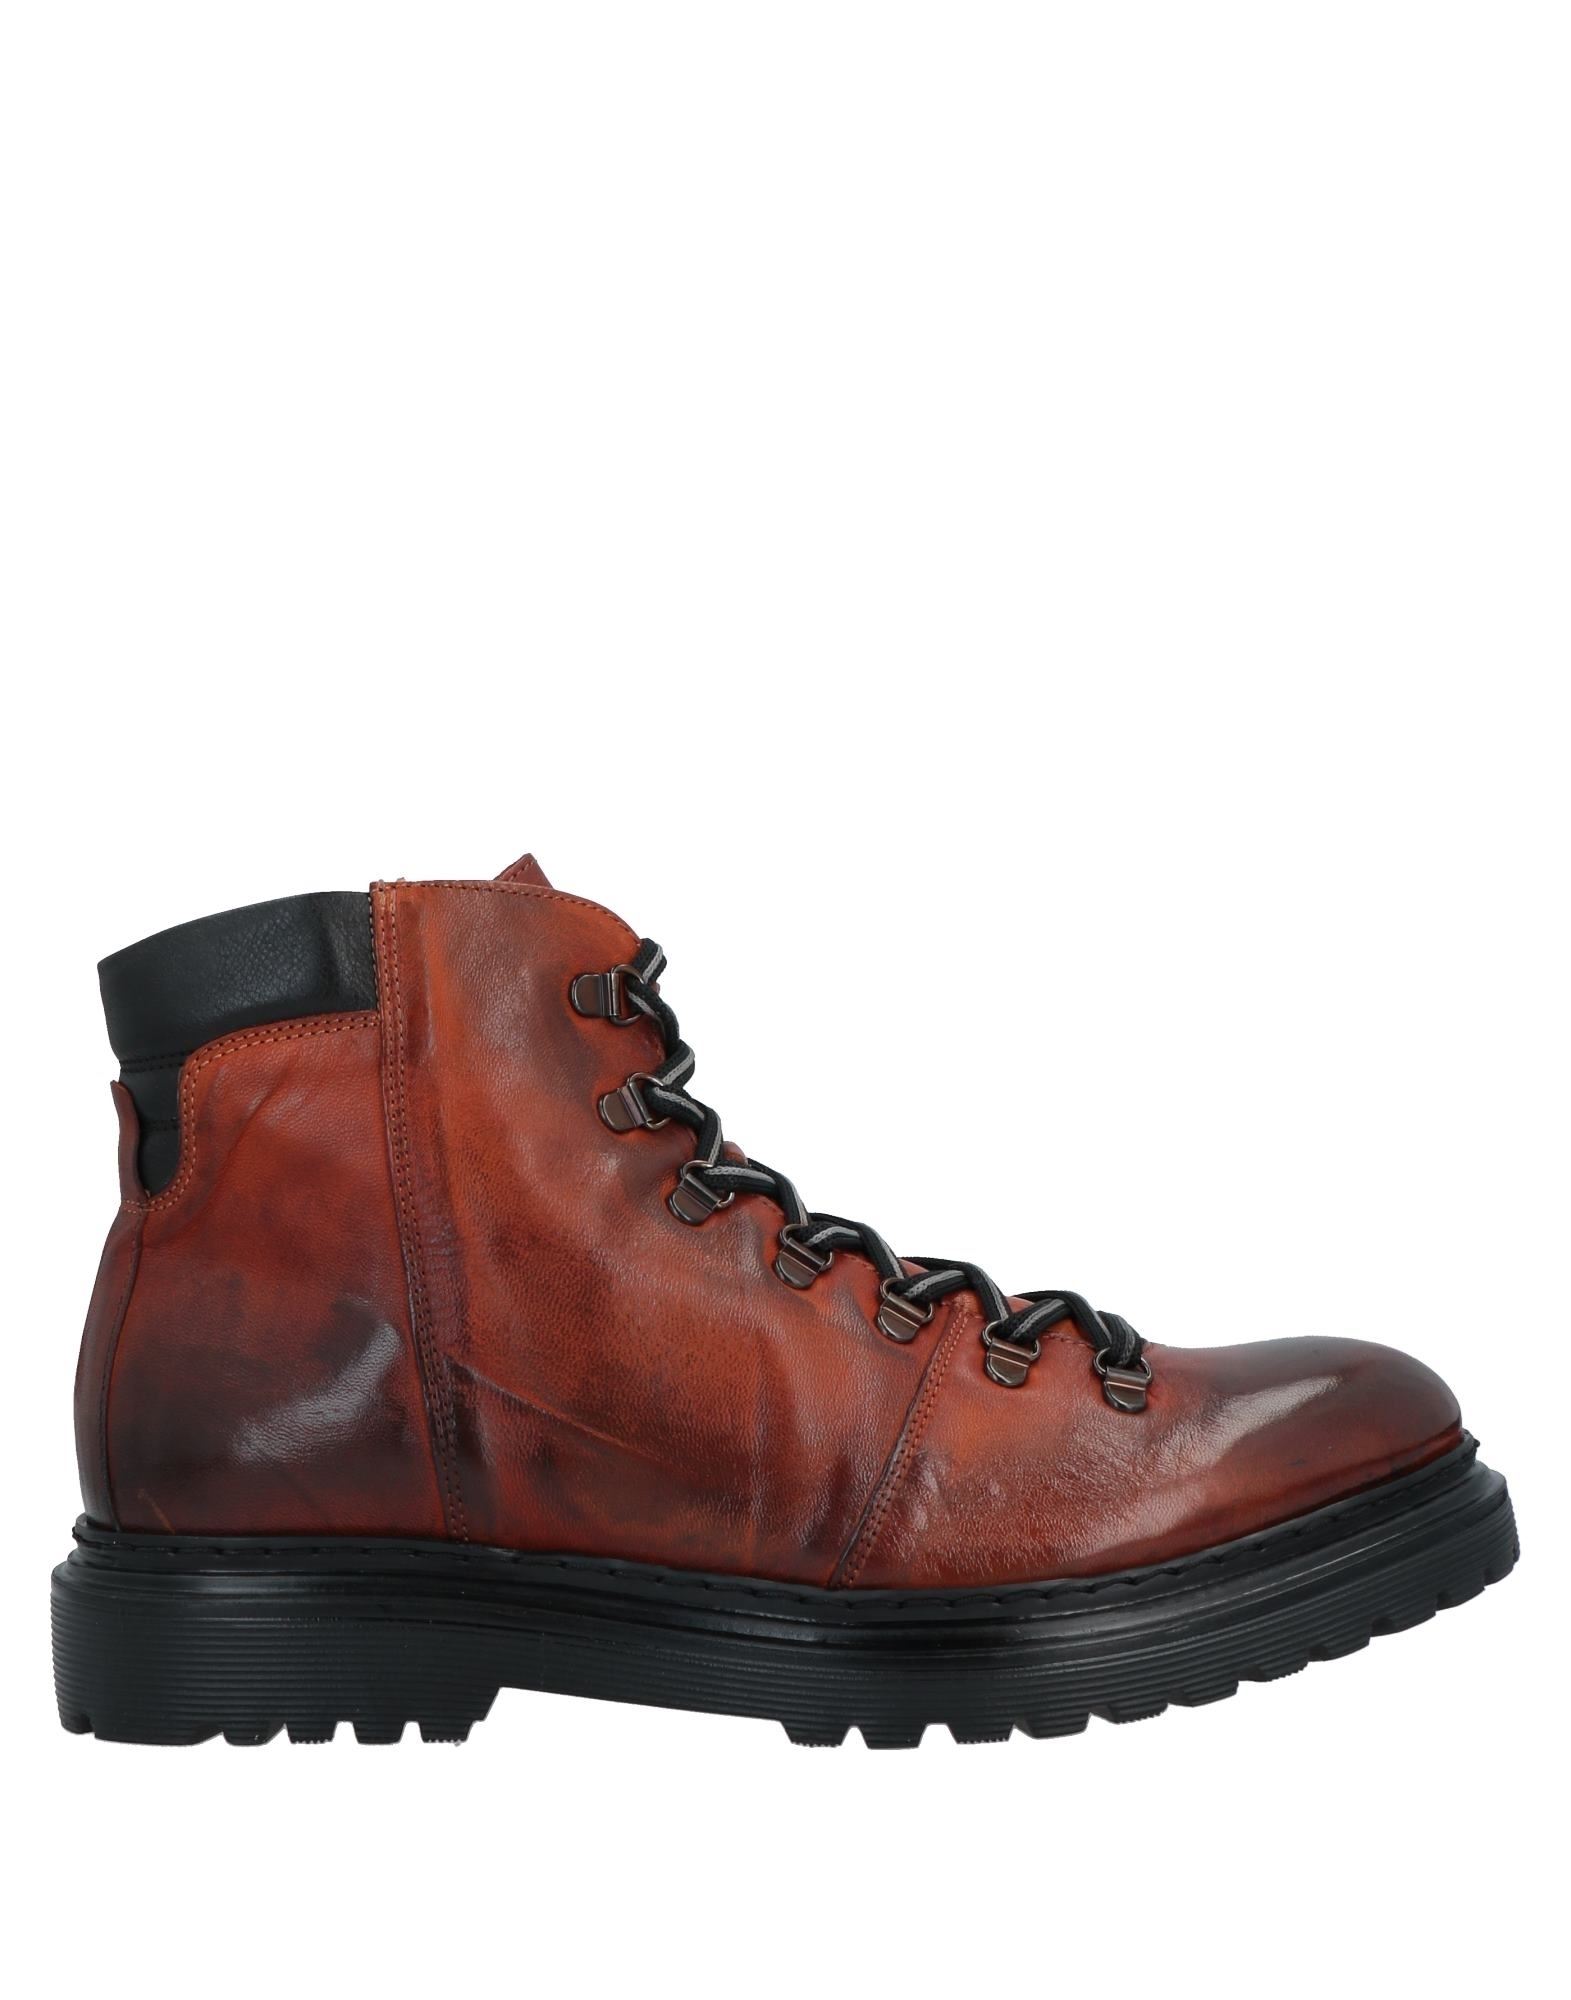 Pawelk's Ankle Boots In Rust